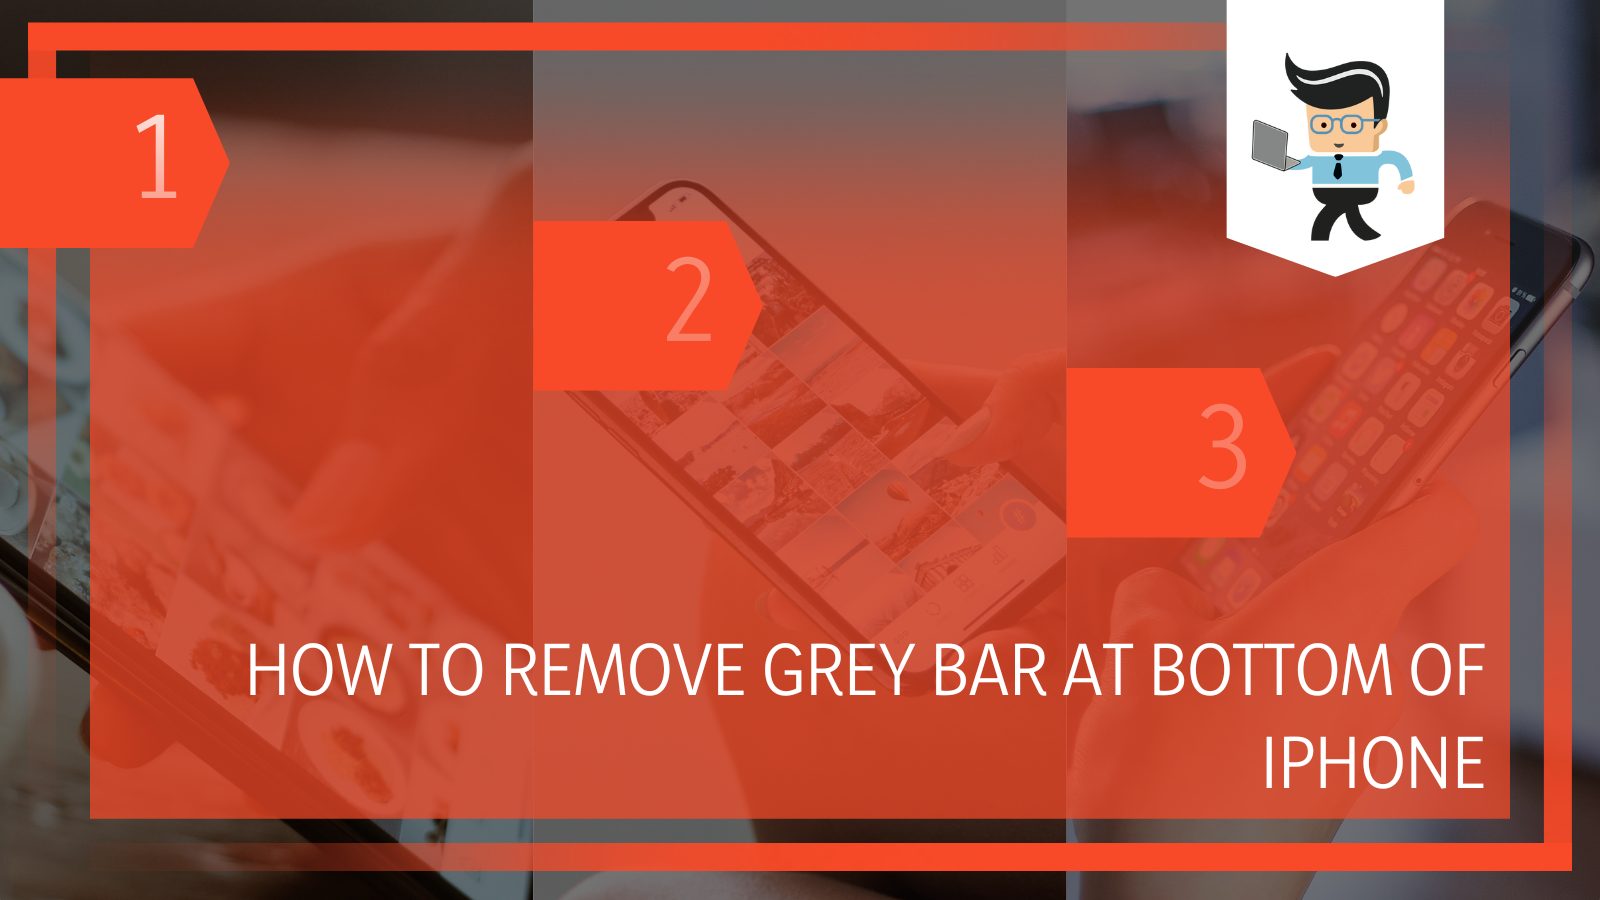 How To Remove Grey Bar At Bottom of iPhone